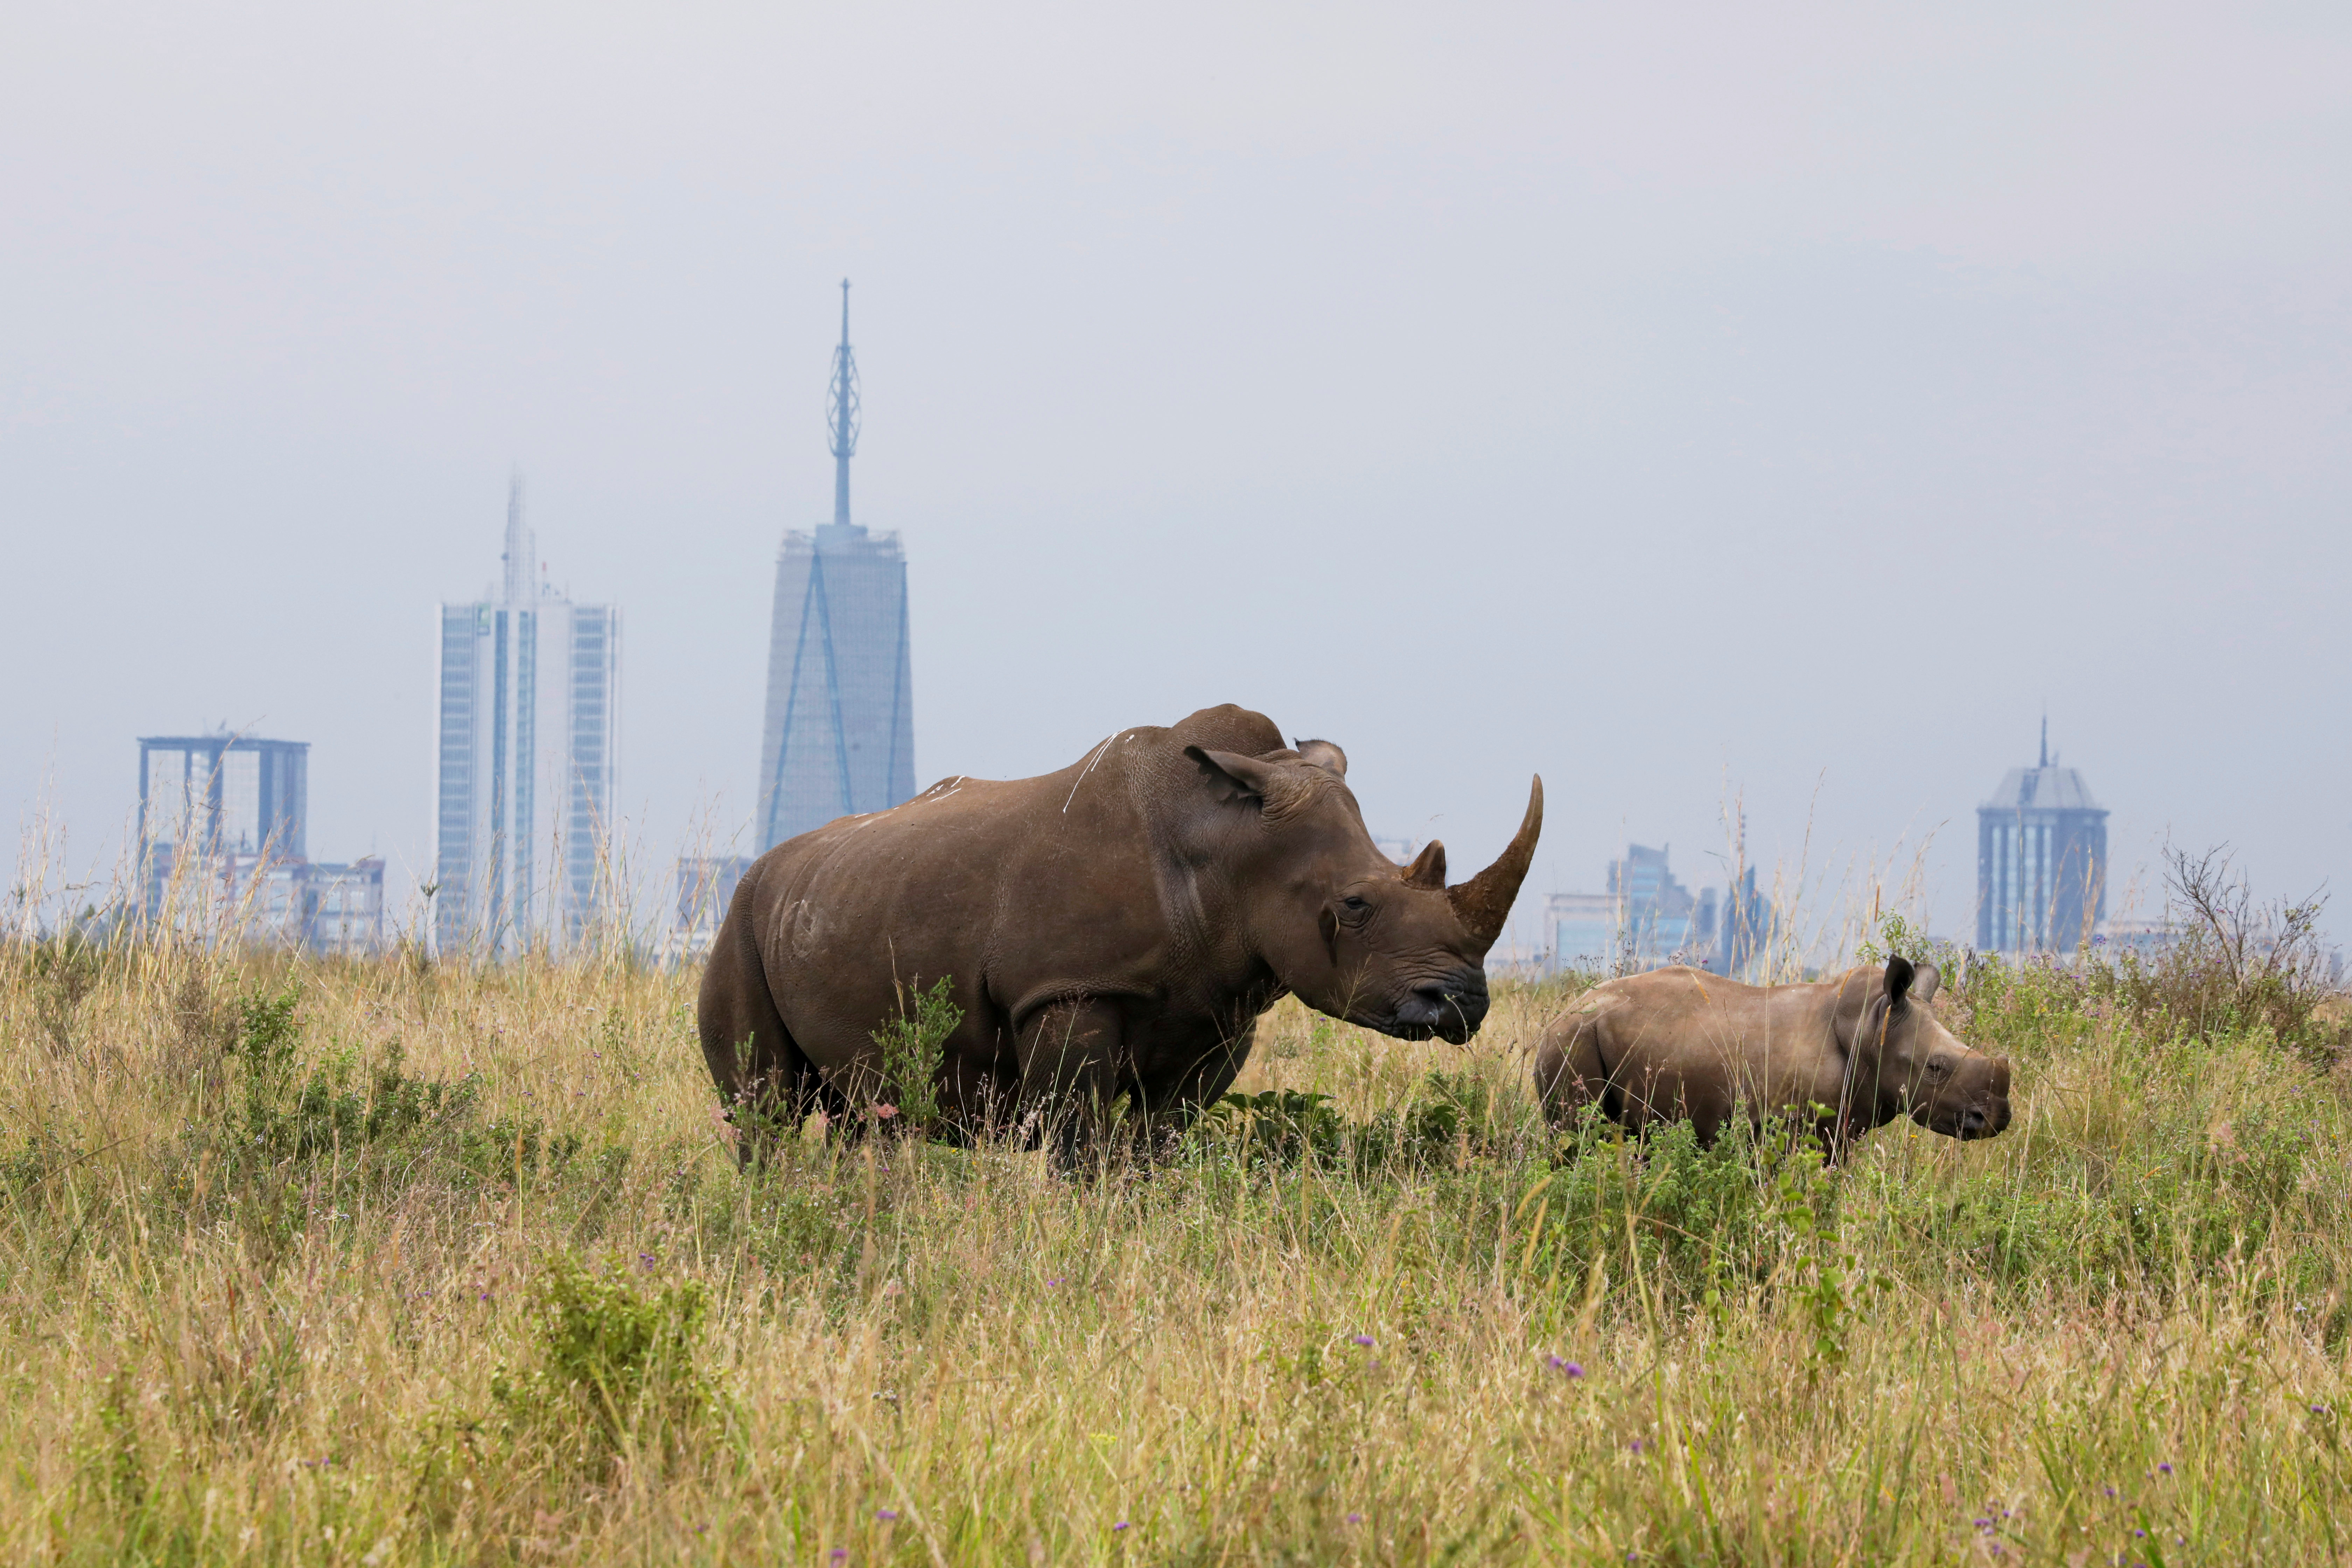 A southern white rhino and her calf are seen inside the Nairobi National Park with the Nairobi skyline in the background